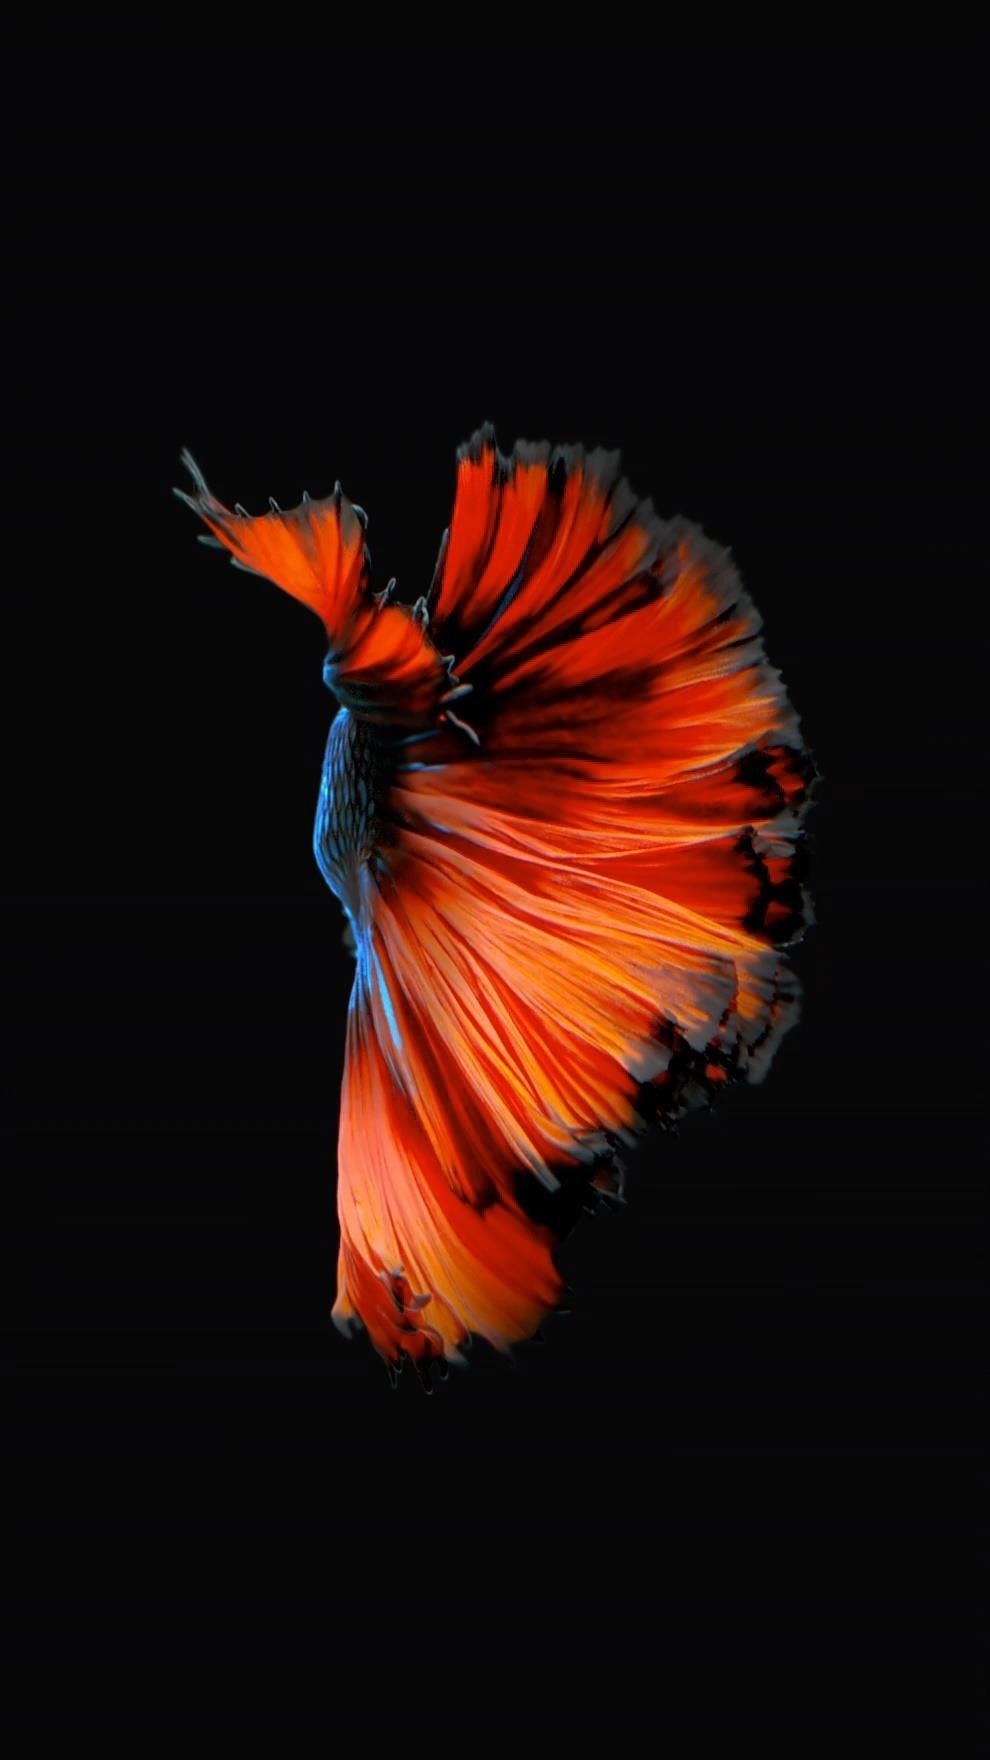 How to Get Apples Live Fish Wallpapers Back on Your iPhone iOS